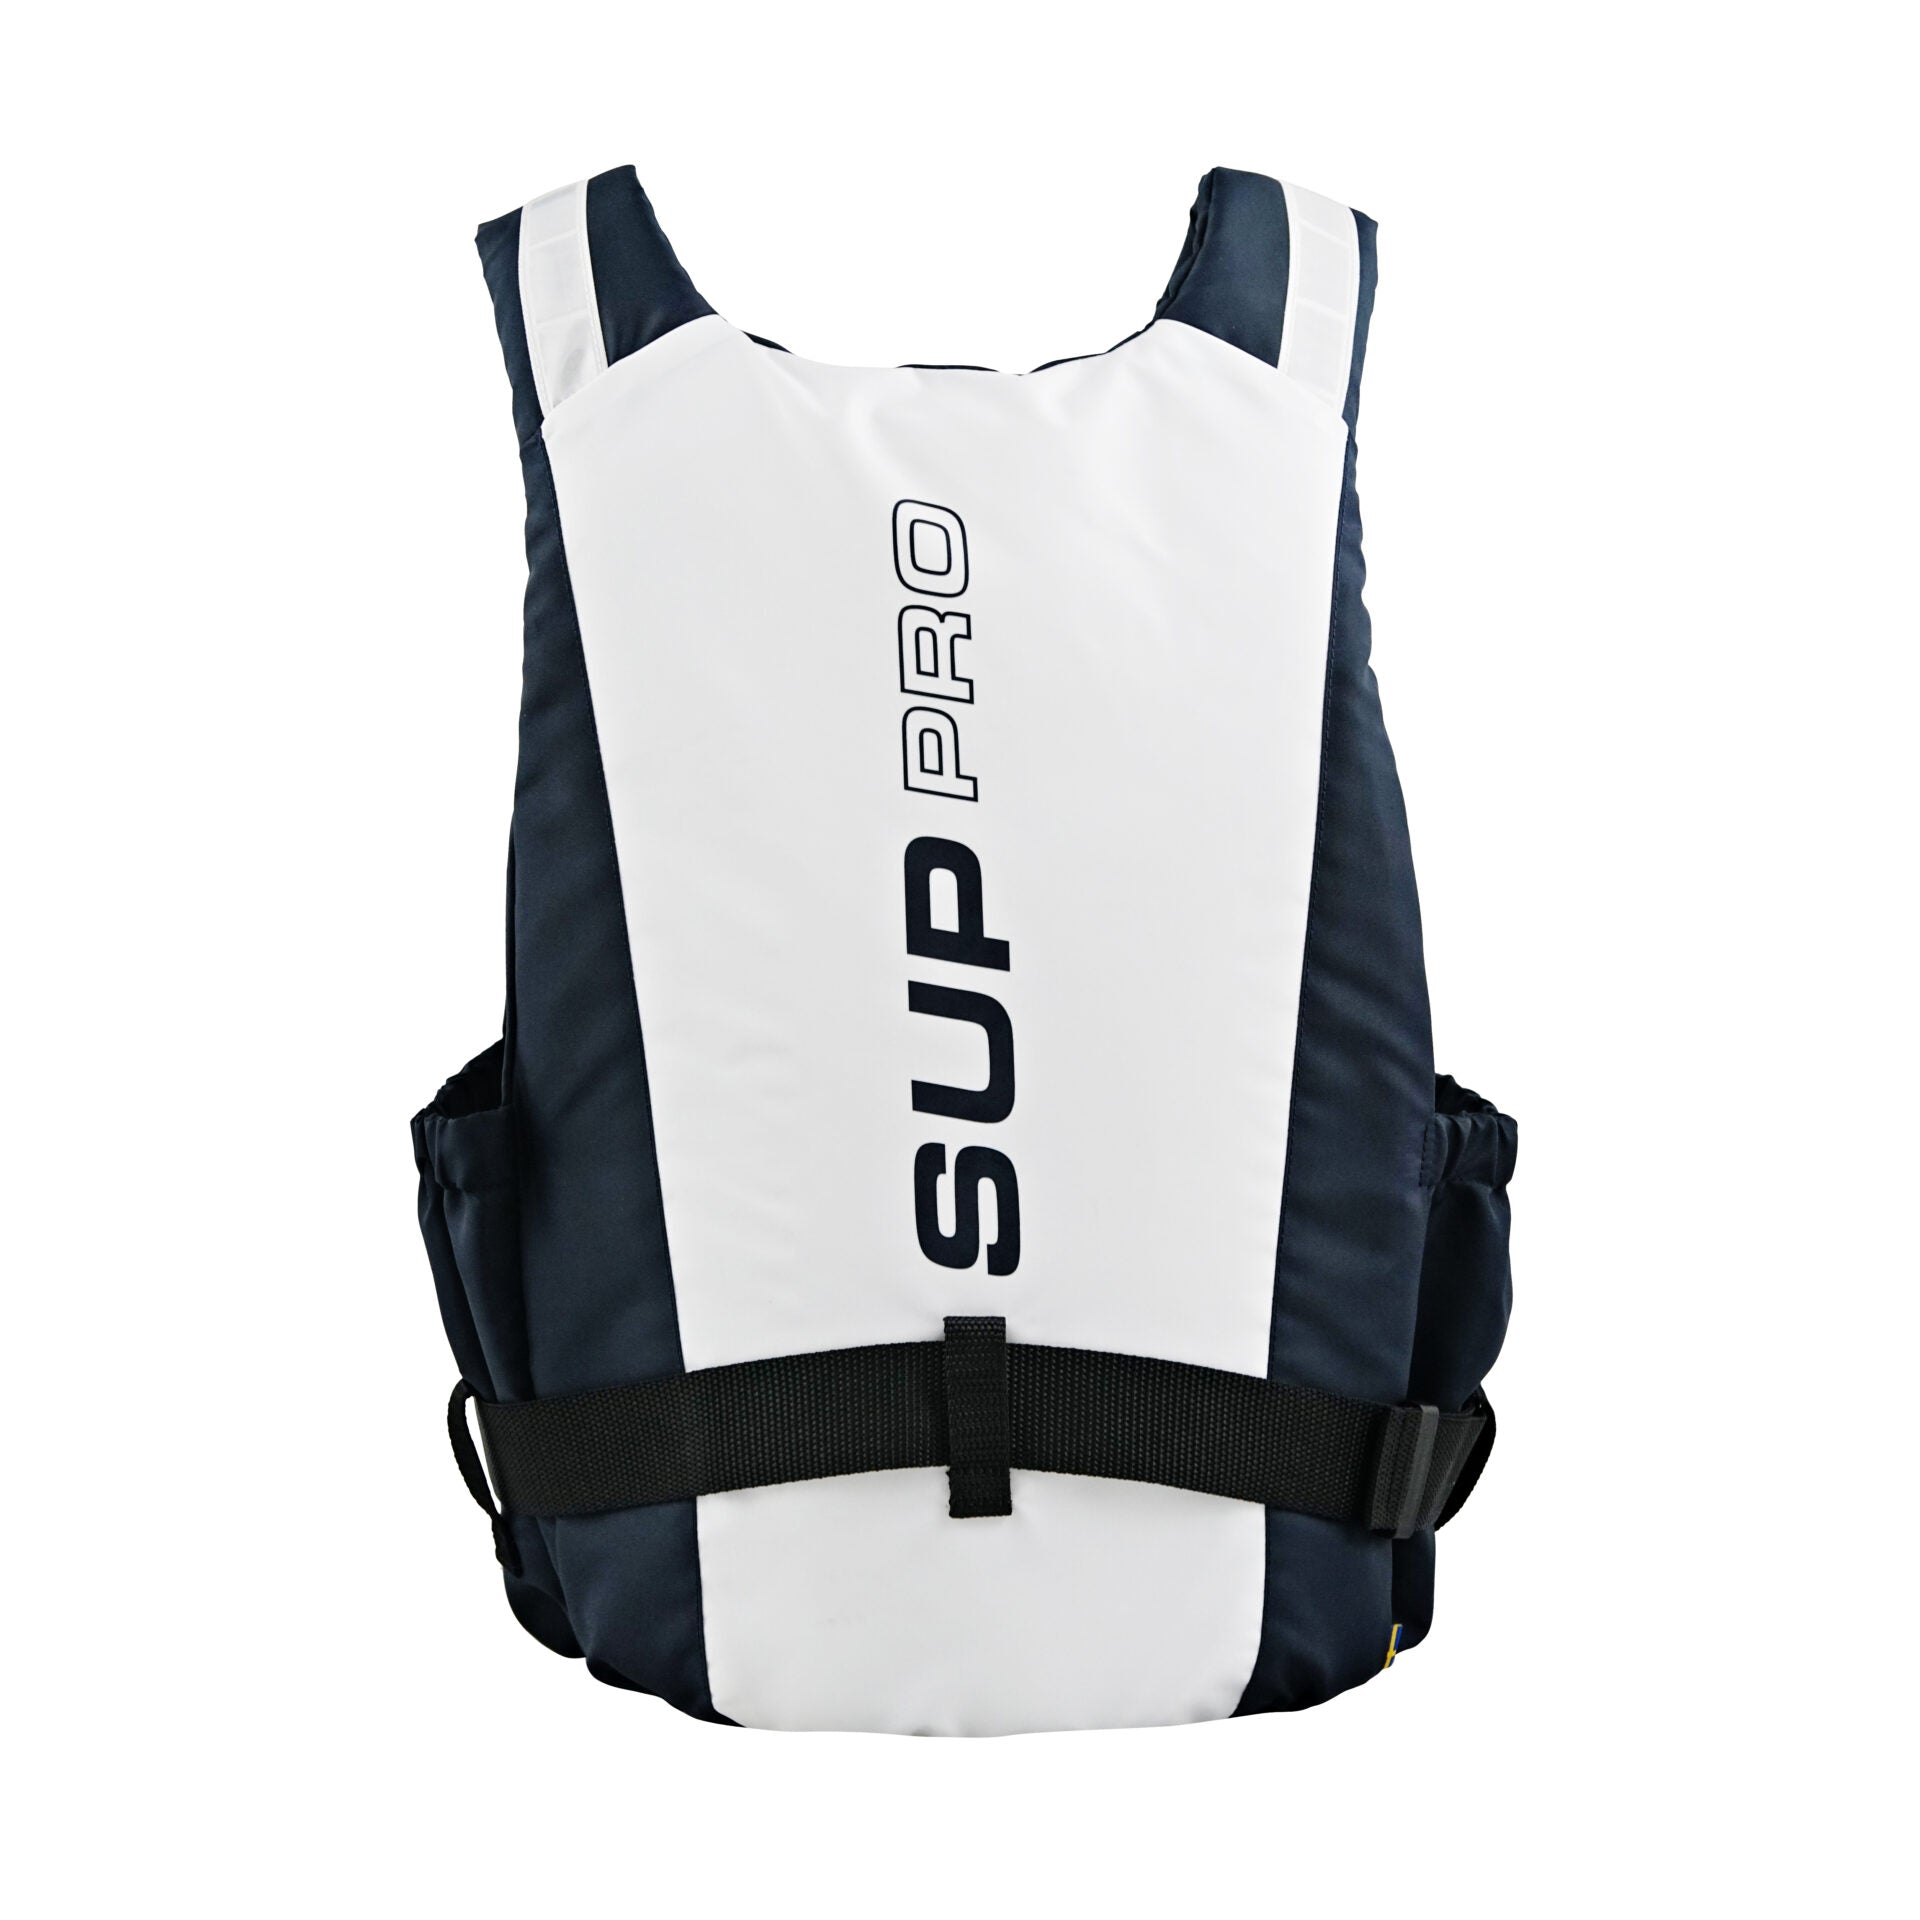 baltic-sup-pro-buoyancy-aid-white-navy-5455-5